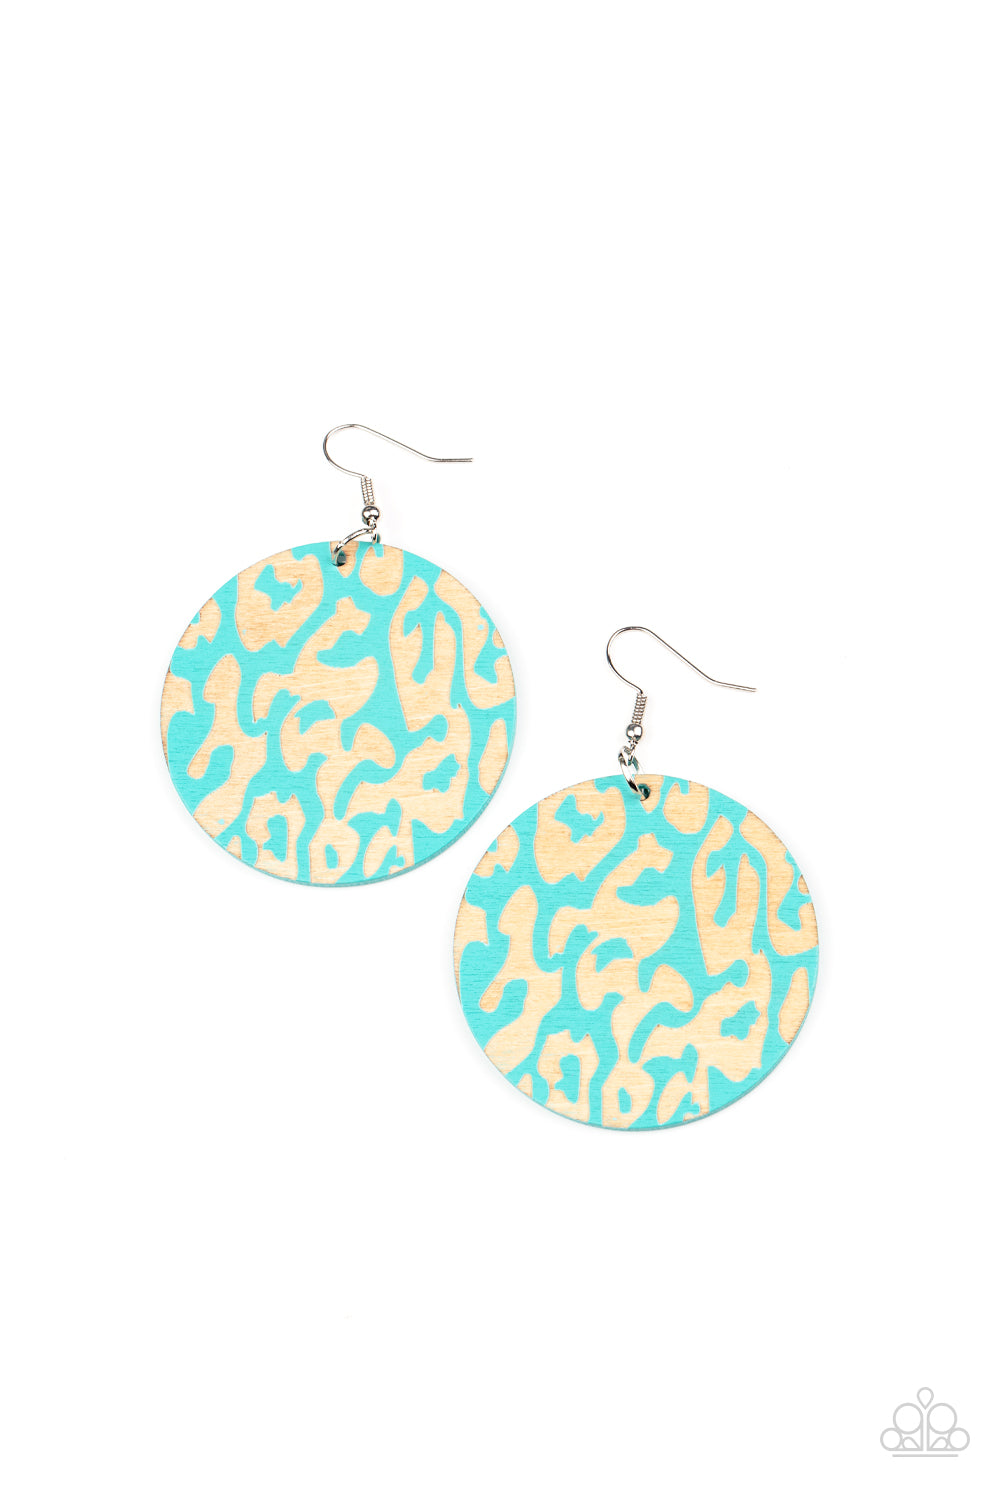 Catwalk Safari Blue Earring - Paparazzi Accessories  The front of a blue wooden disc is chiseled away, revealing a colorful cheetah-like pattern for a wild fashion. Earring attaches to a standard fishhook fitting.  Sold as one pair of earrings.